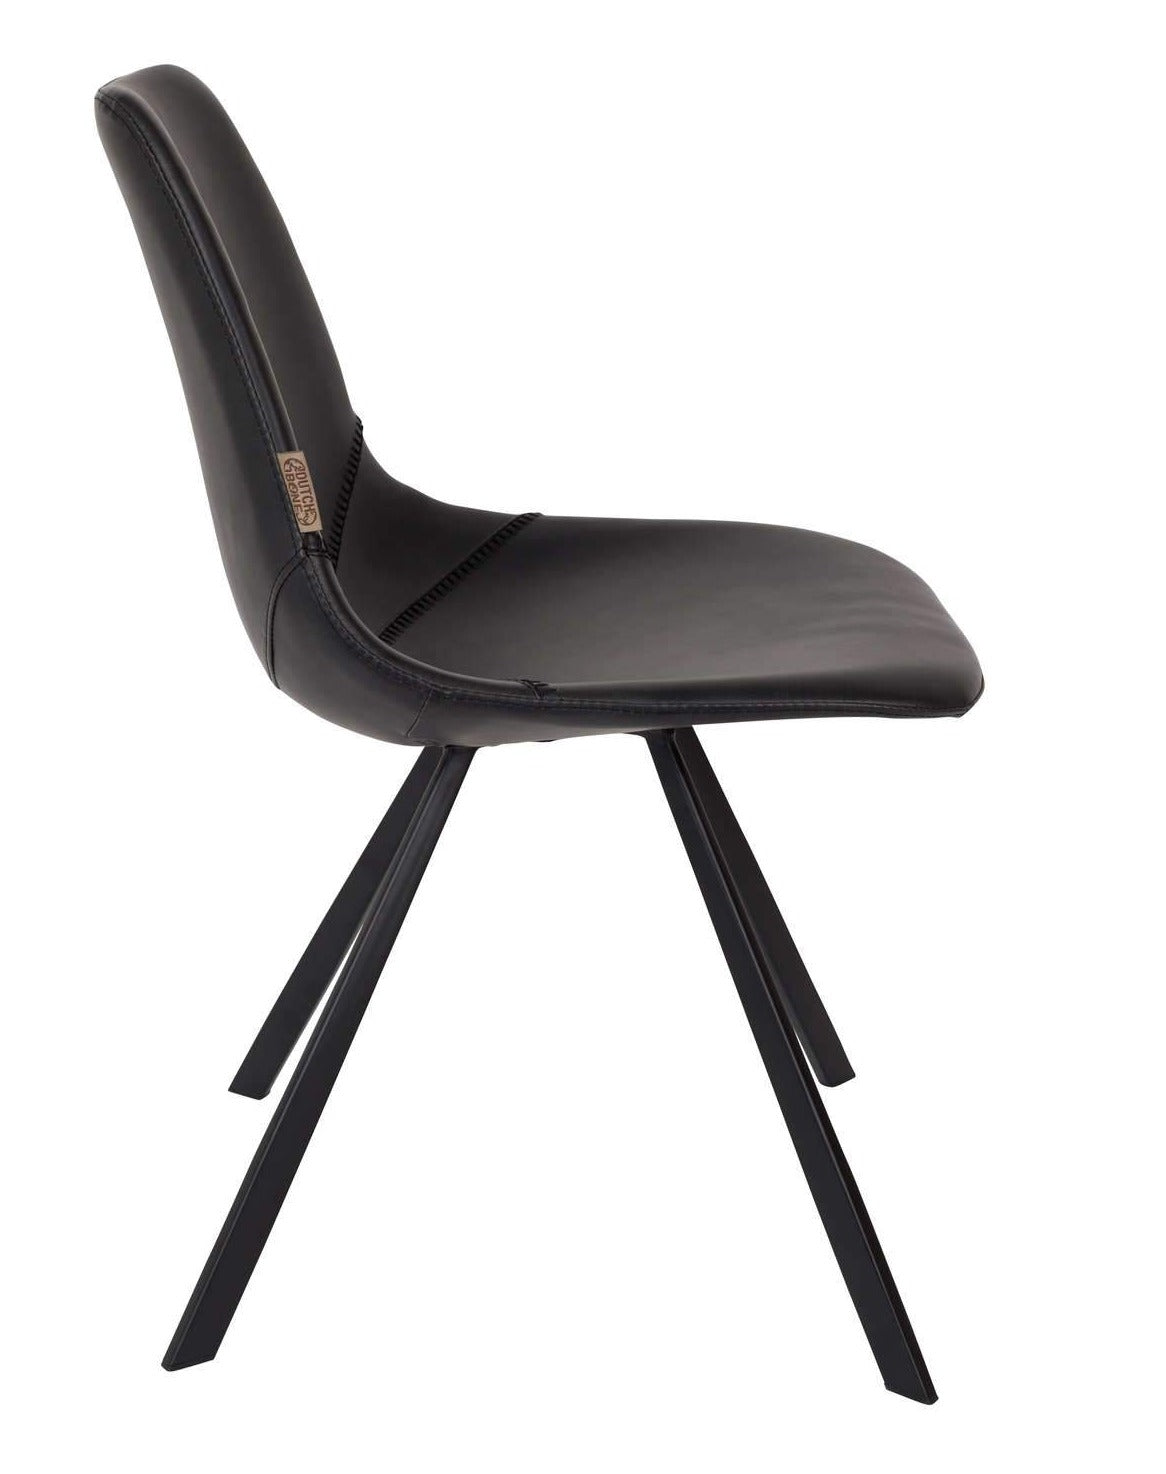 FRANKY chair eco leather black